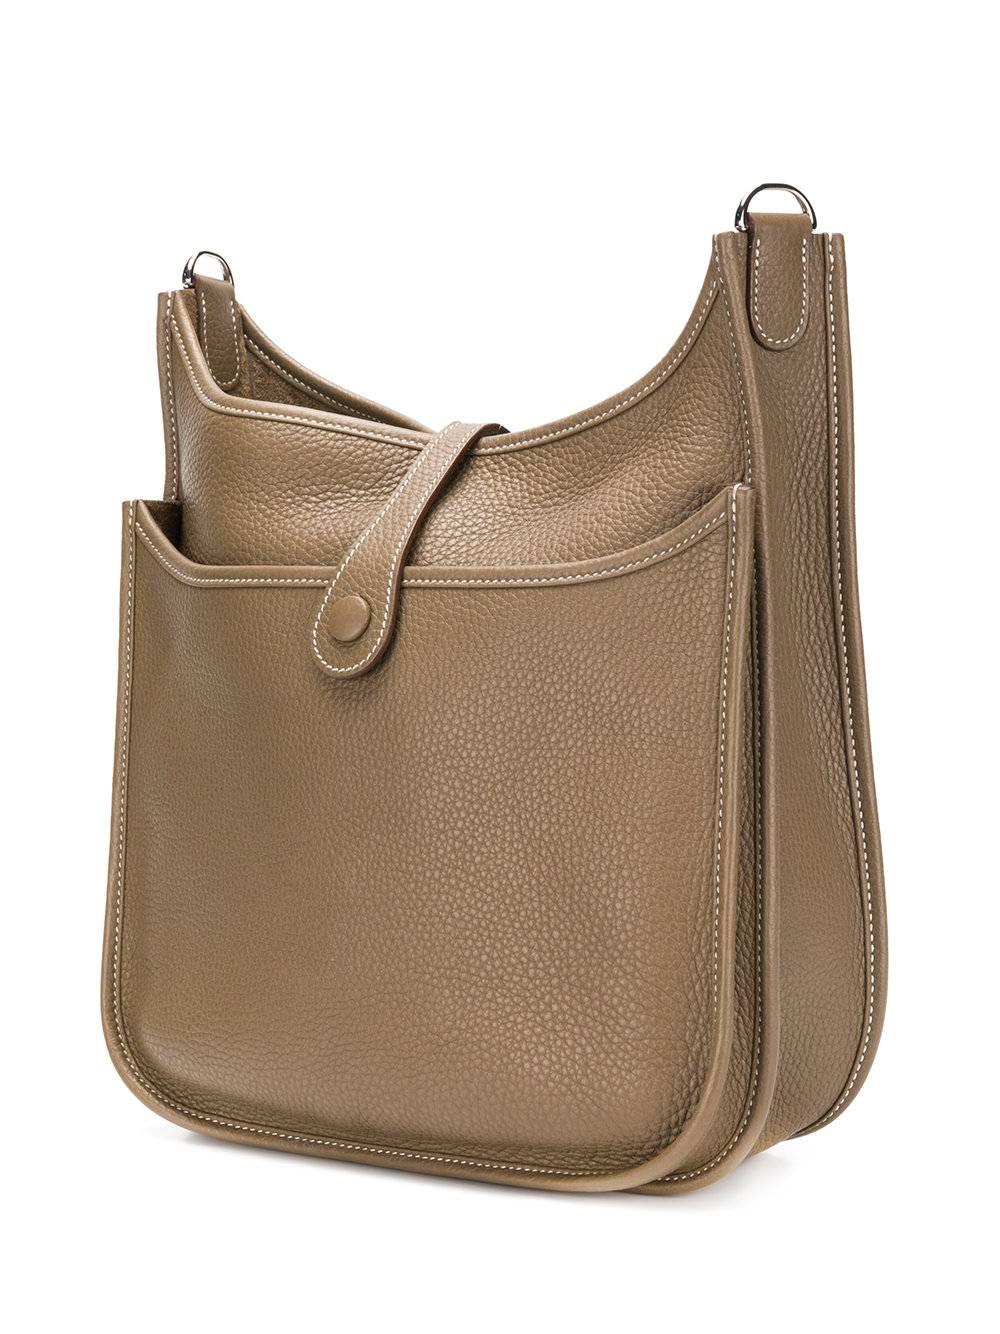 Crafted in a smooth Taurillon Clemence leather, this Evelyn bag by Hermes remains stylish, functional and contemporary in a refined saddle-like shape with a perforated H logo decorating the front. The bag displays a grained texture with an